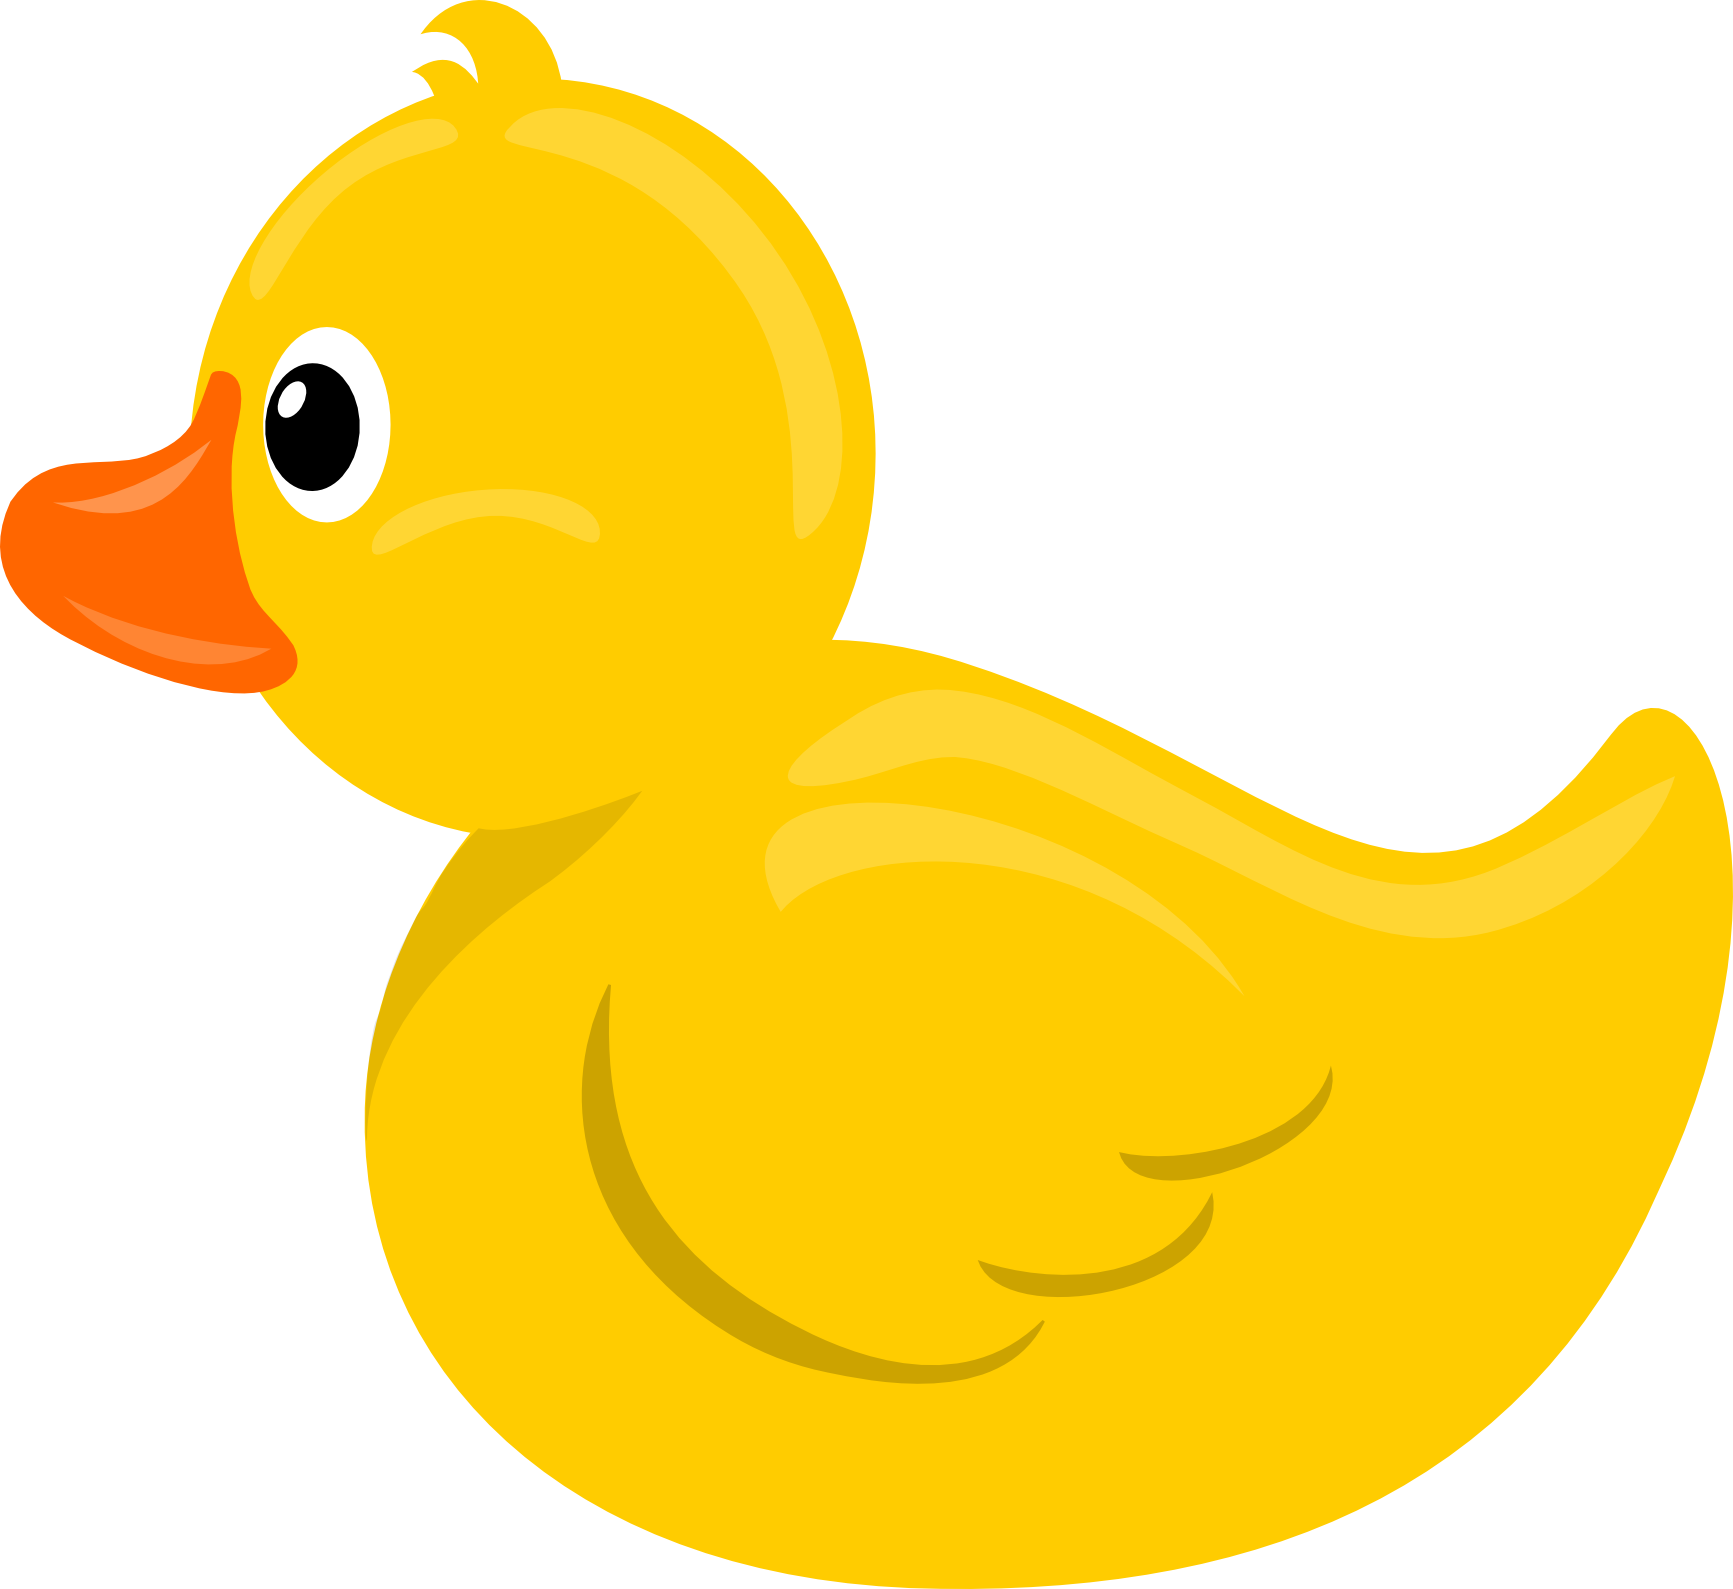 Free Colorful Duck Clip Art